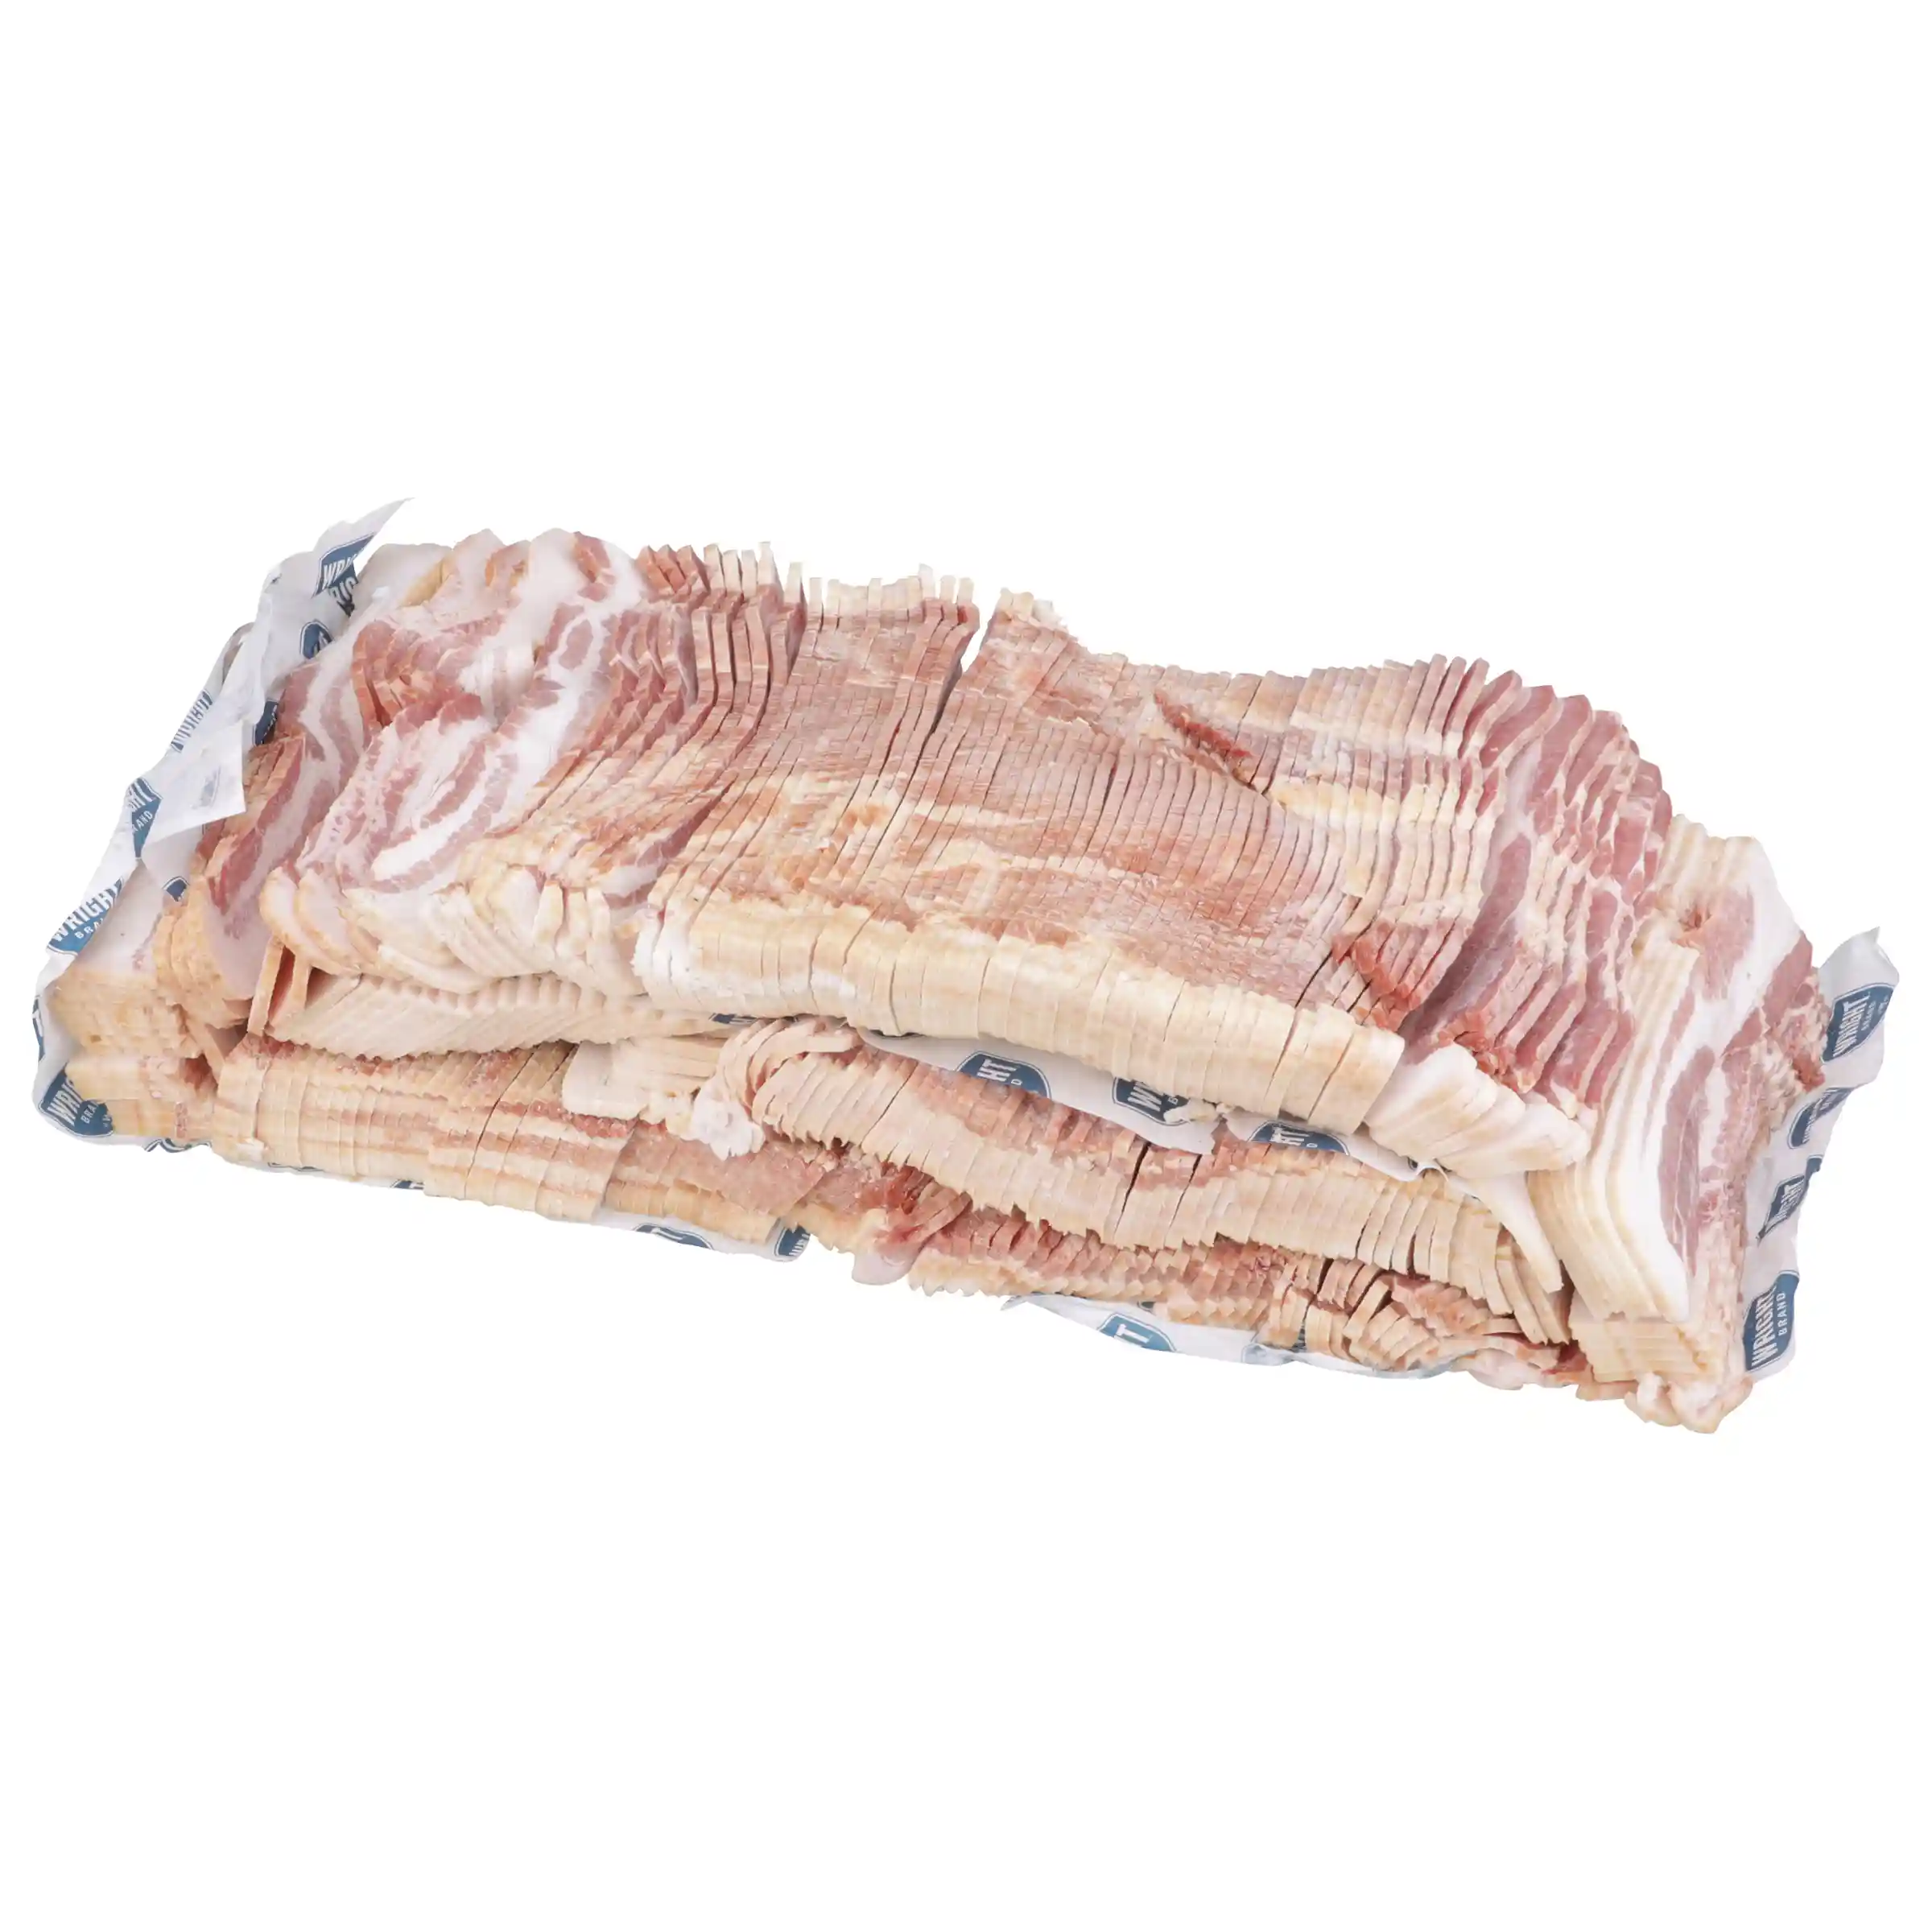 Wright® Brand Naturally Hickory Smoked Thick Sliced Bacon, Bulk, 30 Lbs, 5 Slices/Inch, Frozen_image_21